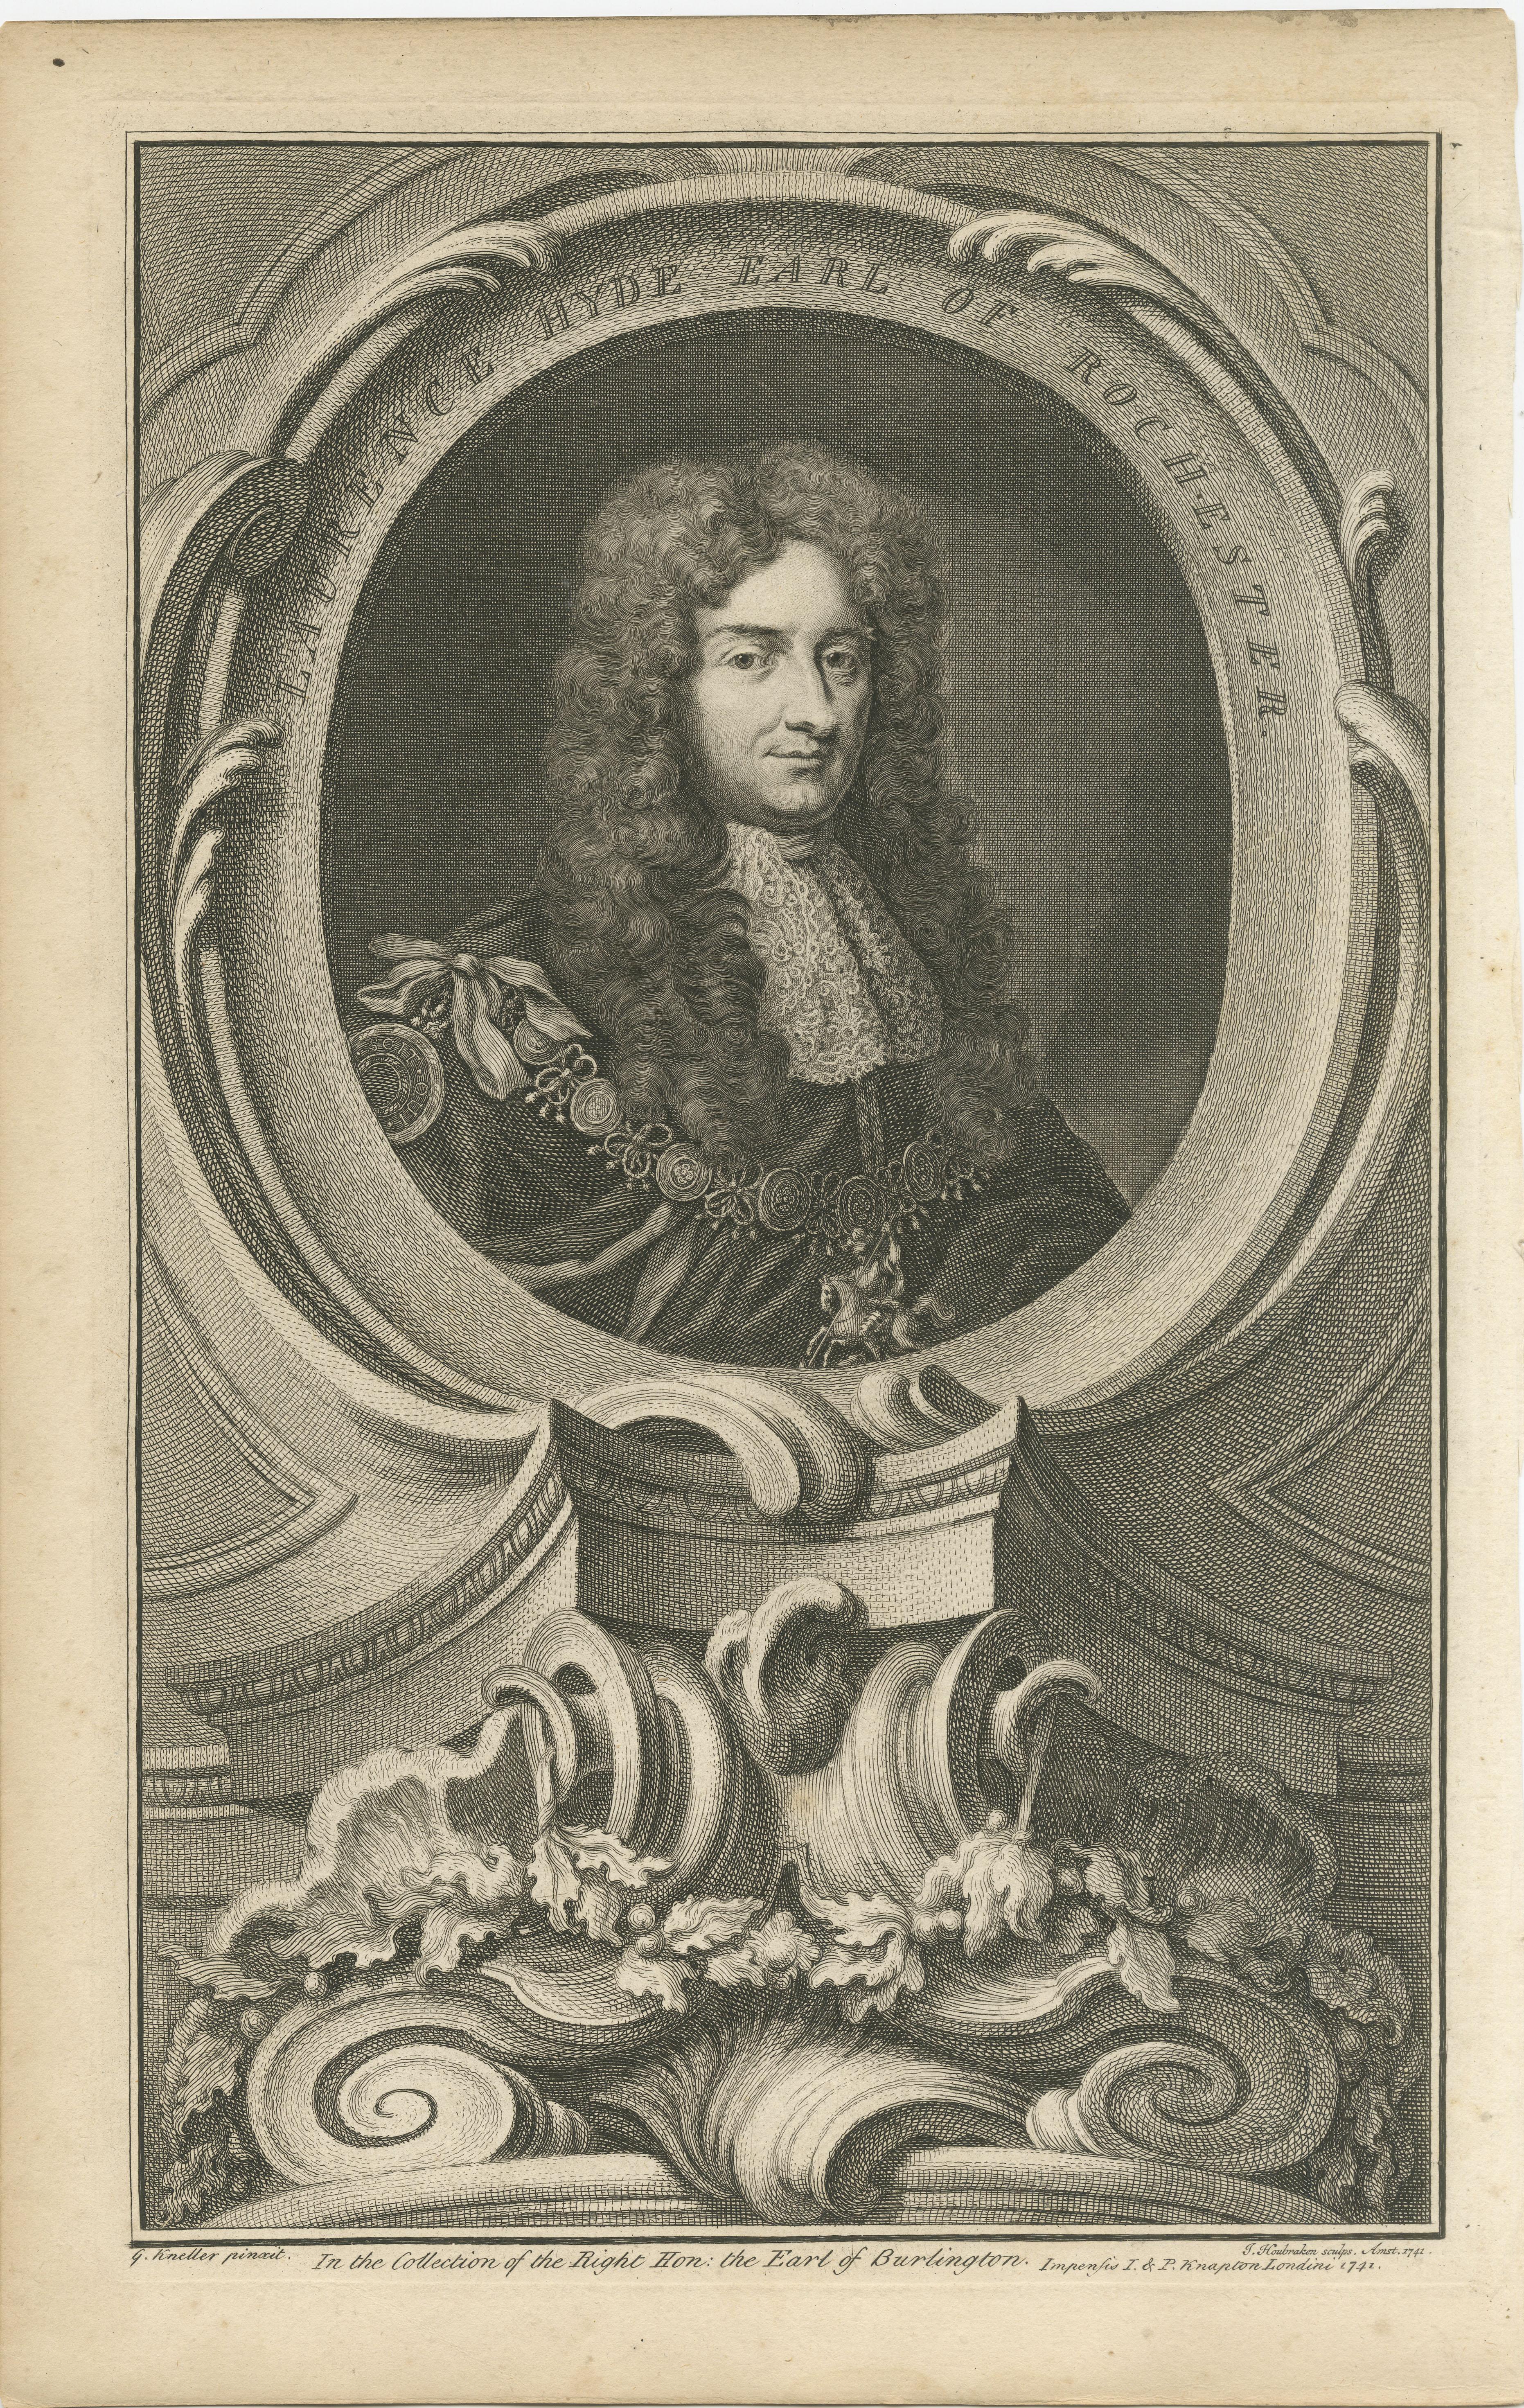 Antique engraving titled 'Laurence Hyde Earl of Rochester'. Laurence Hyde, 1st Earl of Rochester, KG, PC (March 1642 – 2 May 1711) was an English statesman and writer. He was originally a supporter of James II but later supported the Glorious